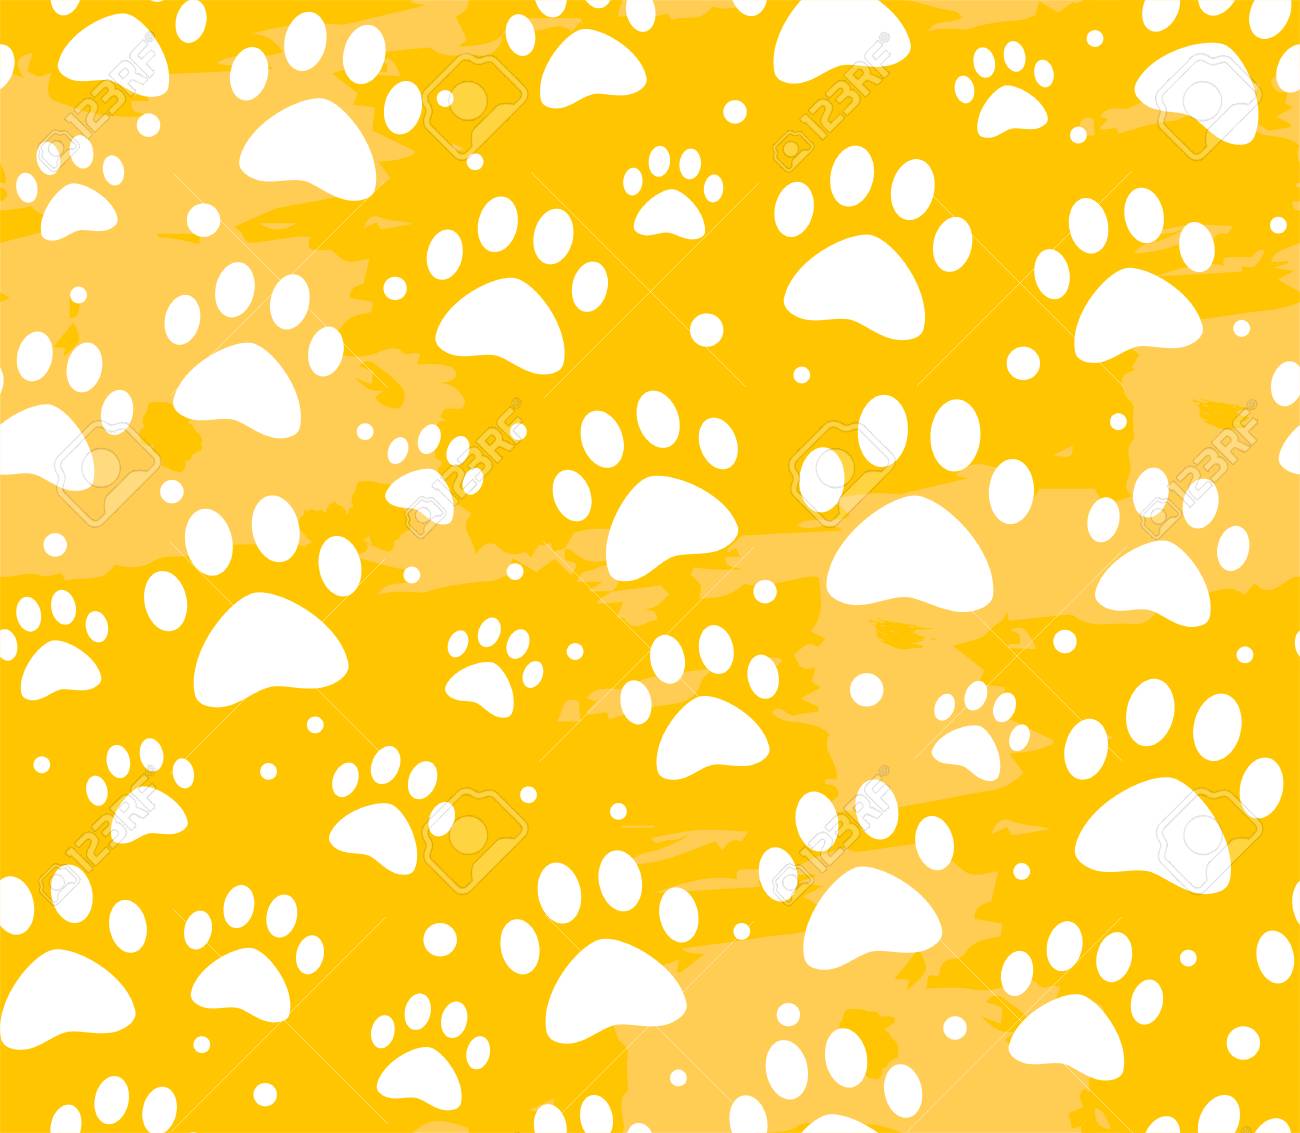 Cat Or Dog Paw Seamless Patterns Backgrounds For Pet Shop 1300x1133